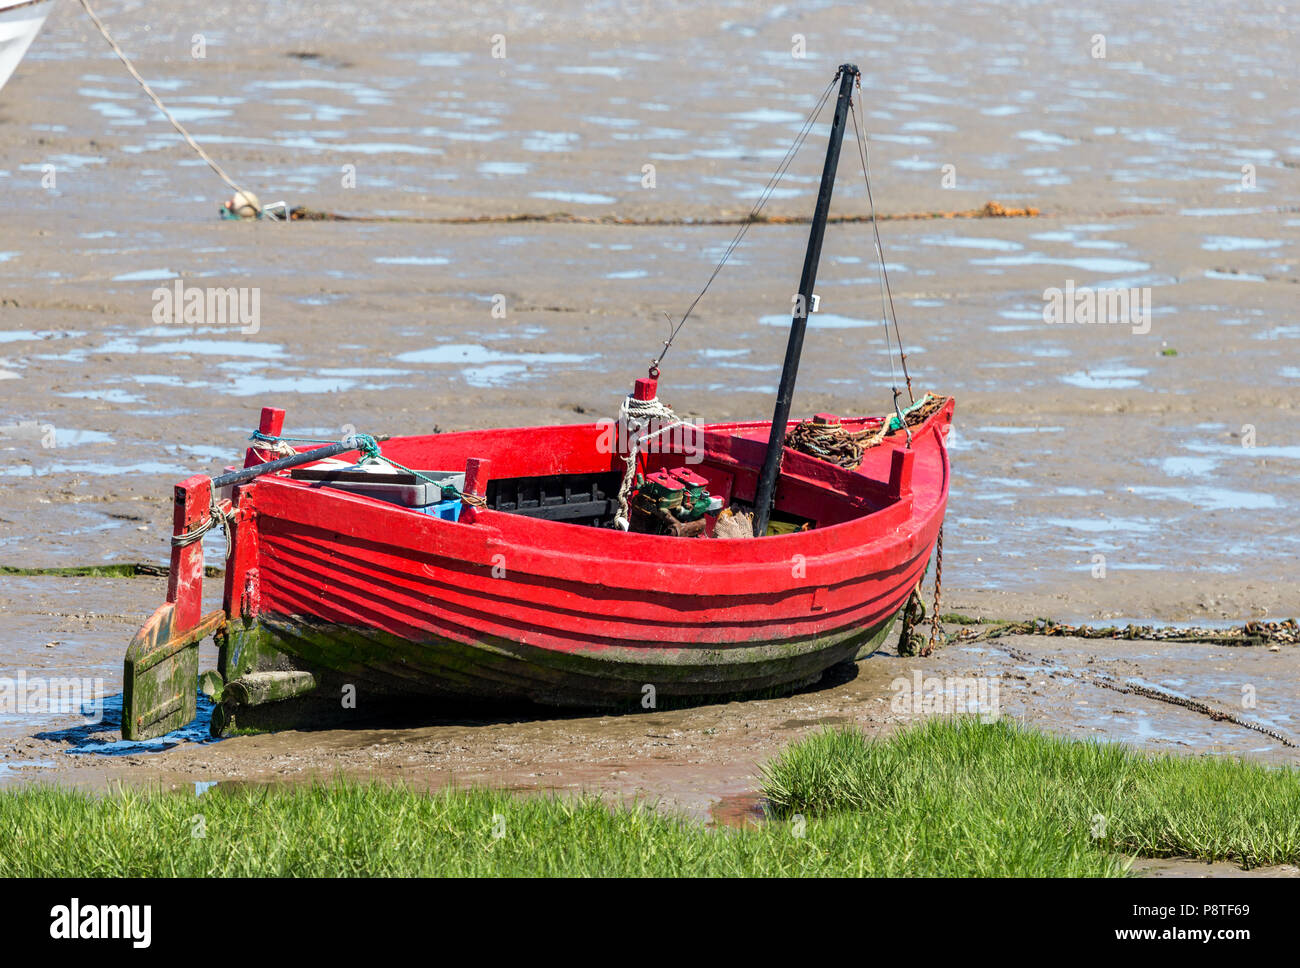 A small red In-shore fishing boat aground and waiting for the tide in Morecambe Bay Stock Photo